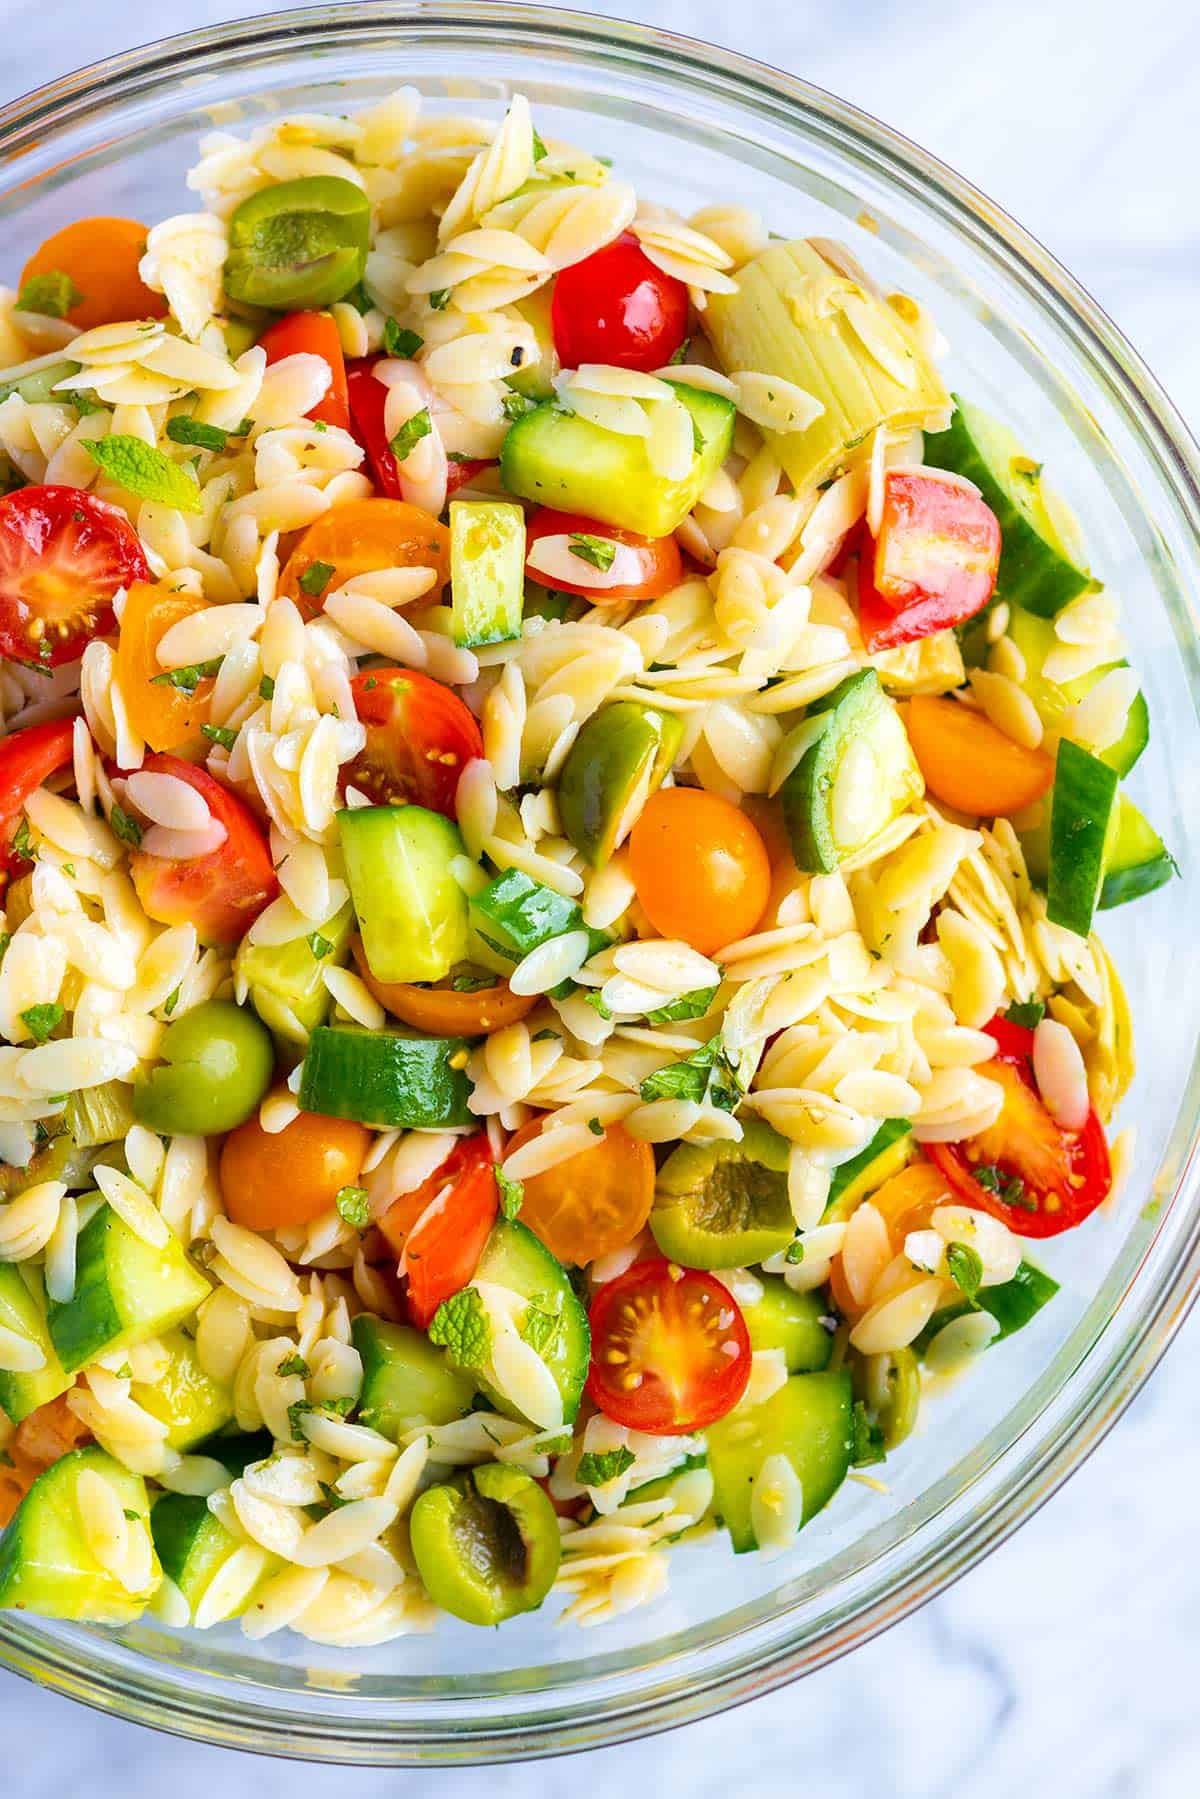 Everyone loves this easy orzo pasta salad recipe with a simple lemon vinaigrette, cucumber, olives, tomato and fresh herbs.